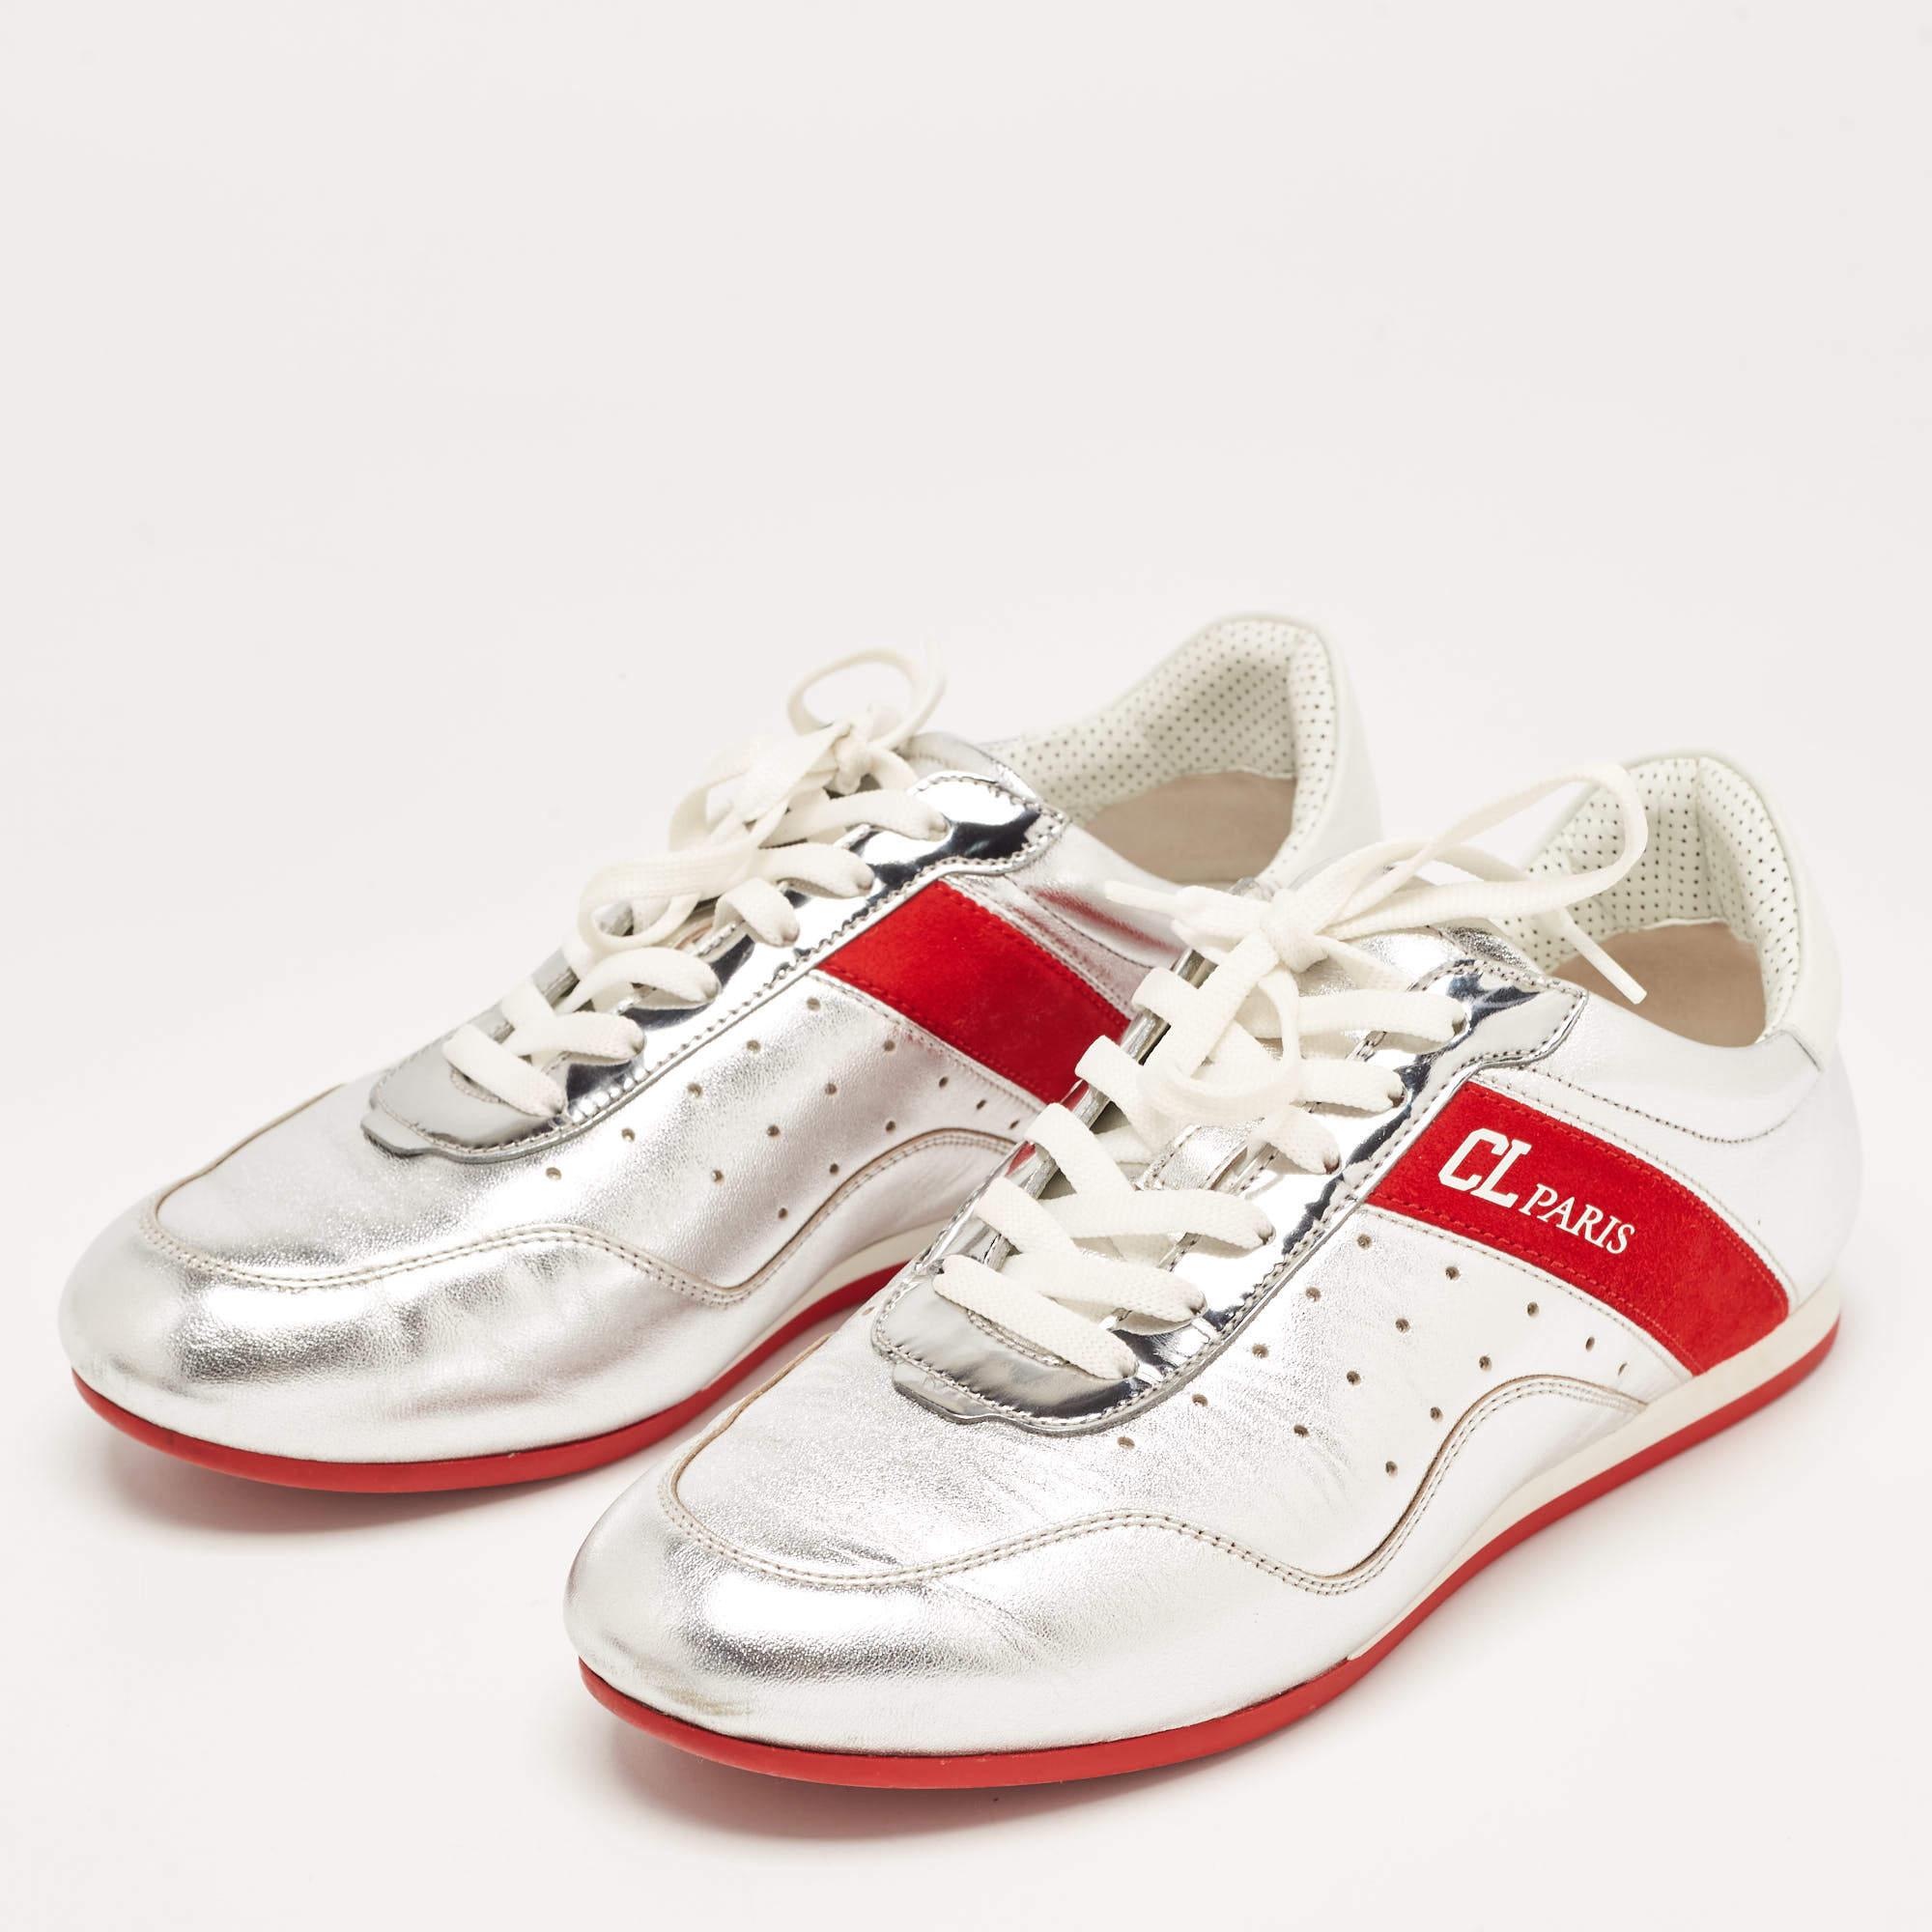 Christian Louboutin Silver/Red Leather and Suede My K Low Sneakers Size 36.5 1